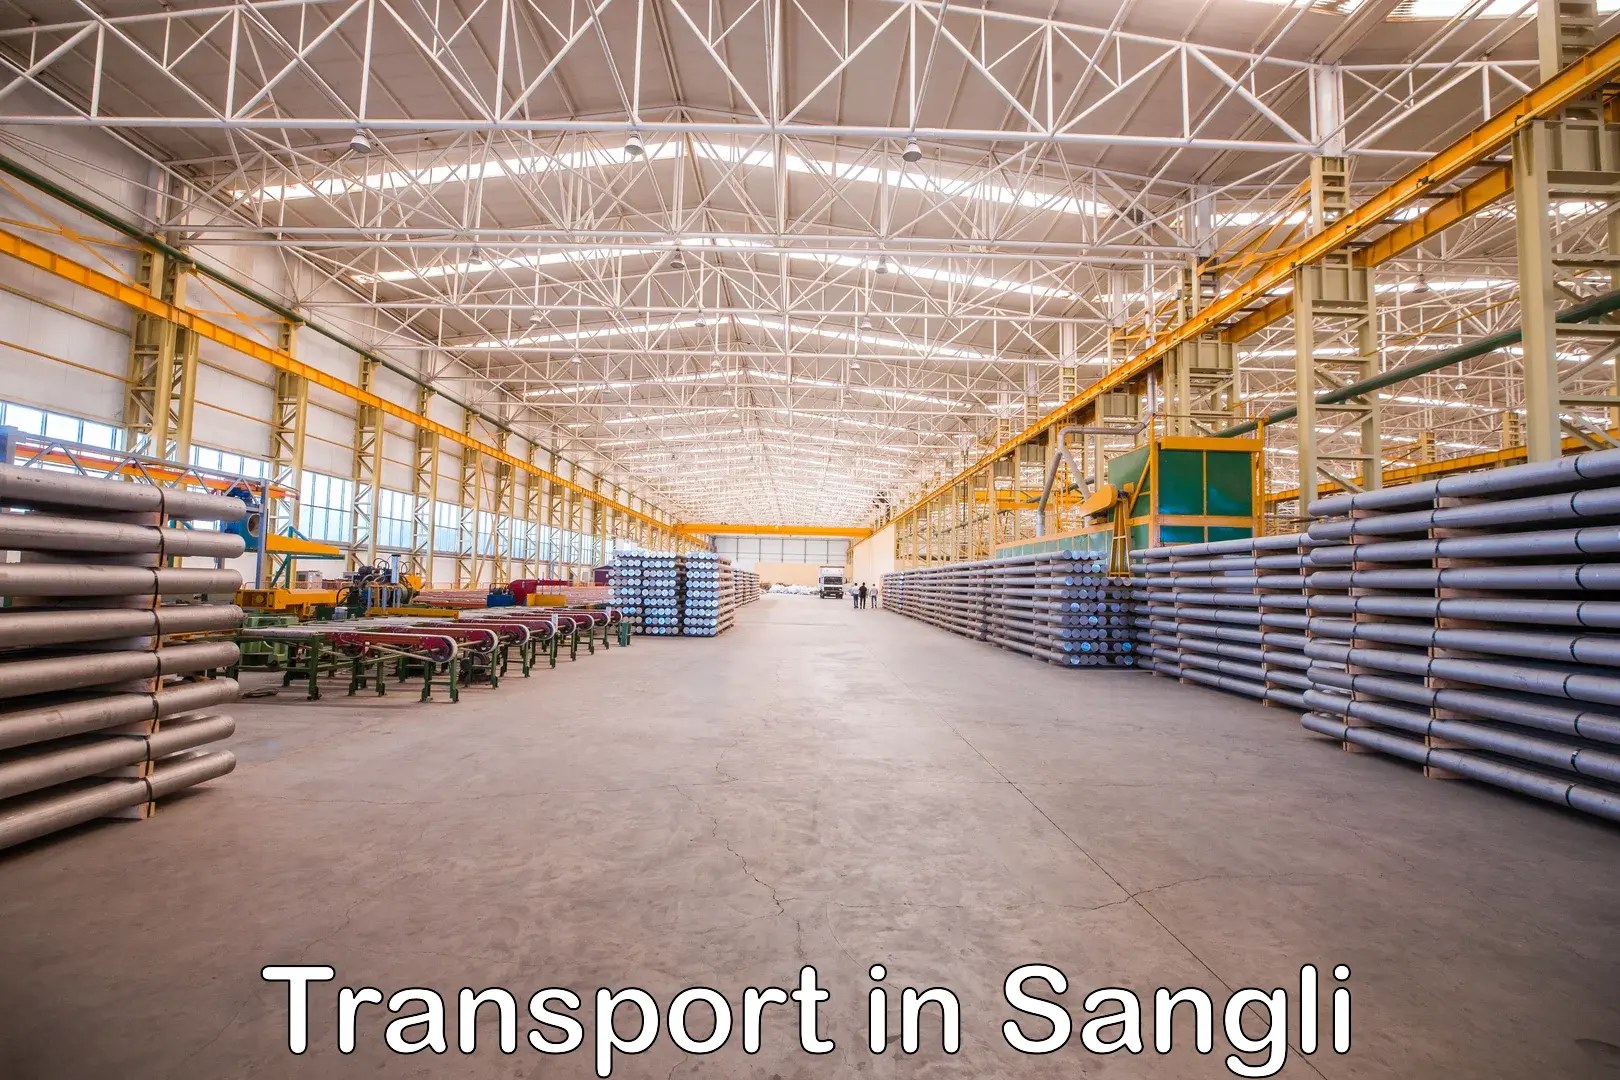 Daily transport service in Sangli